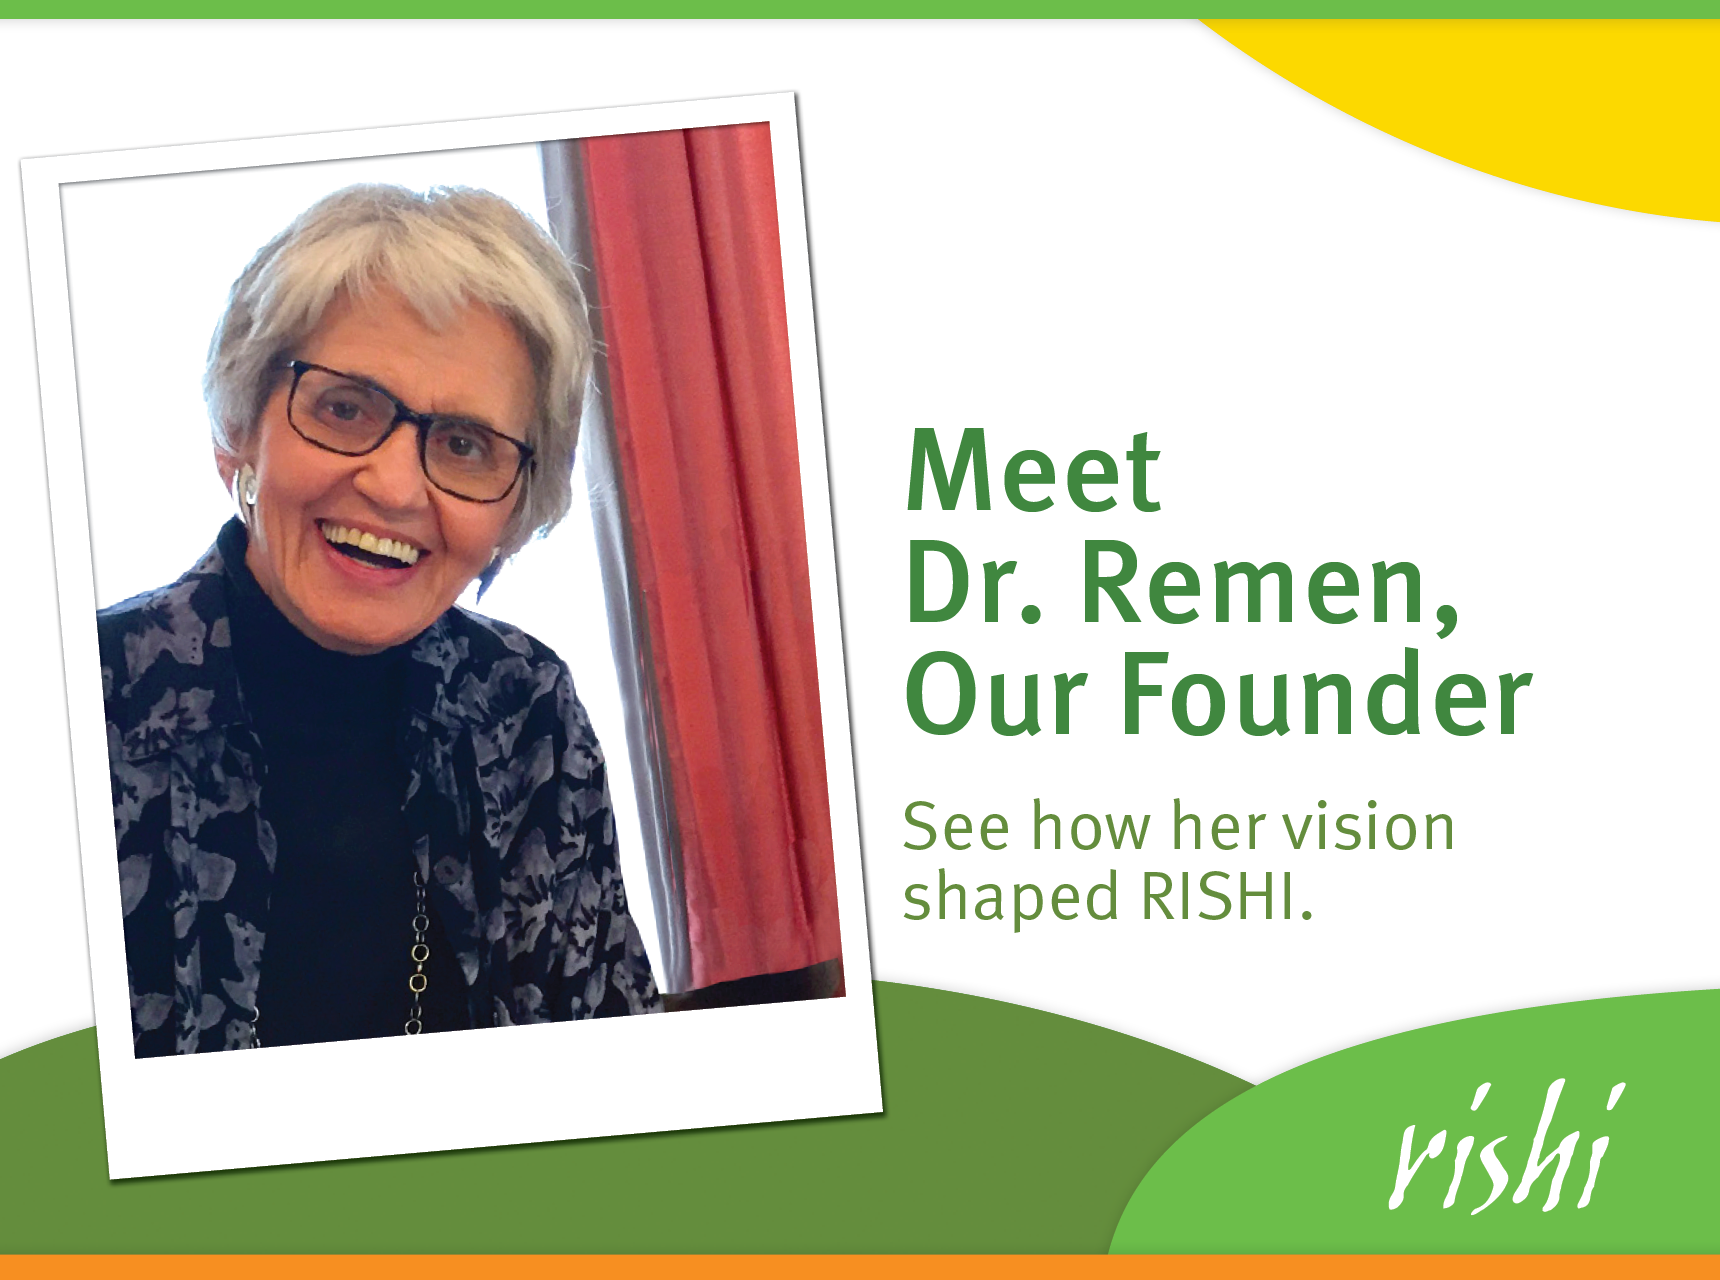 Meet Dr. Remen, Our Founder. See how her vision shaped RISHI.